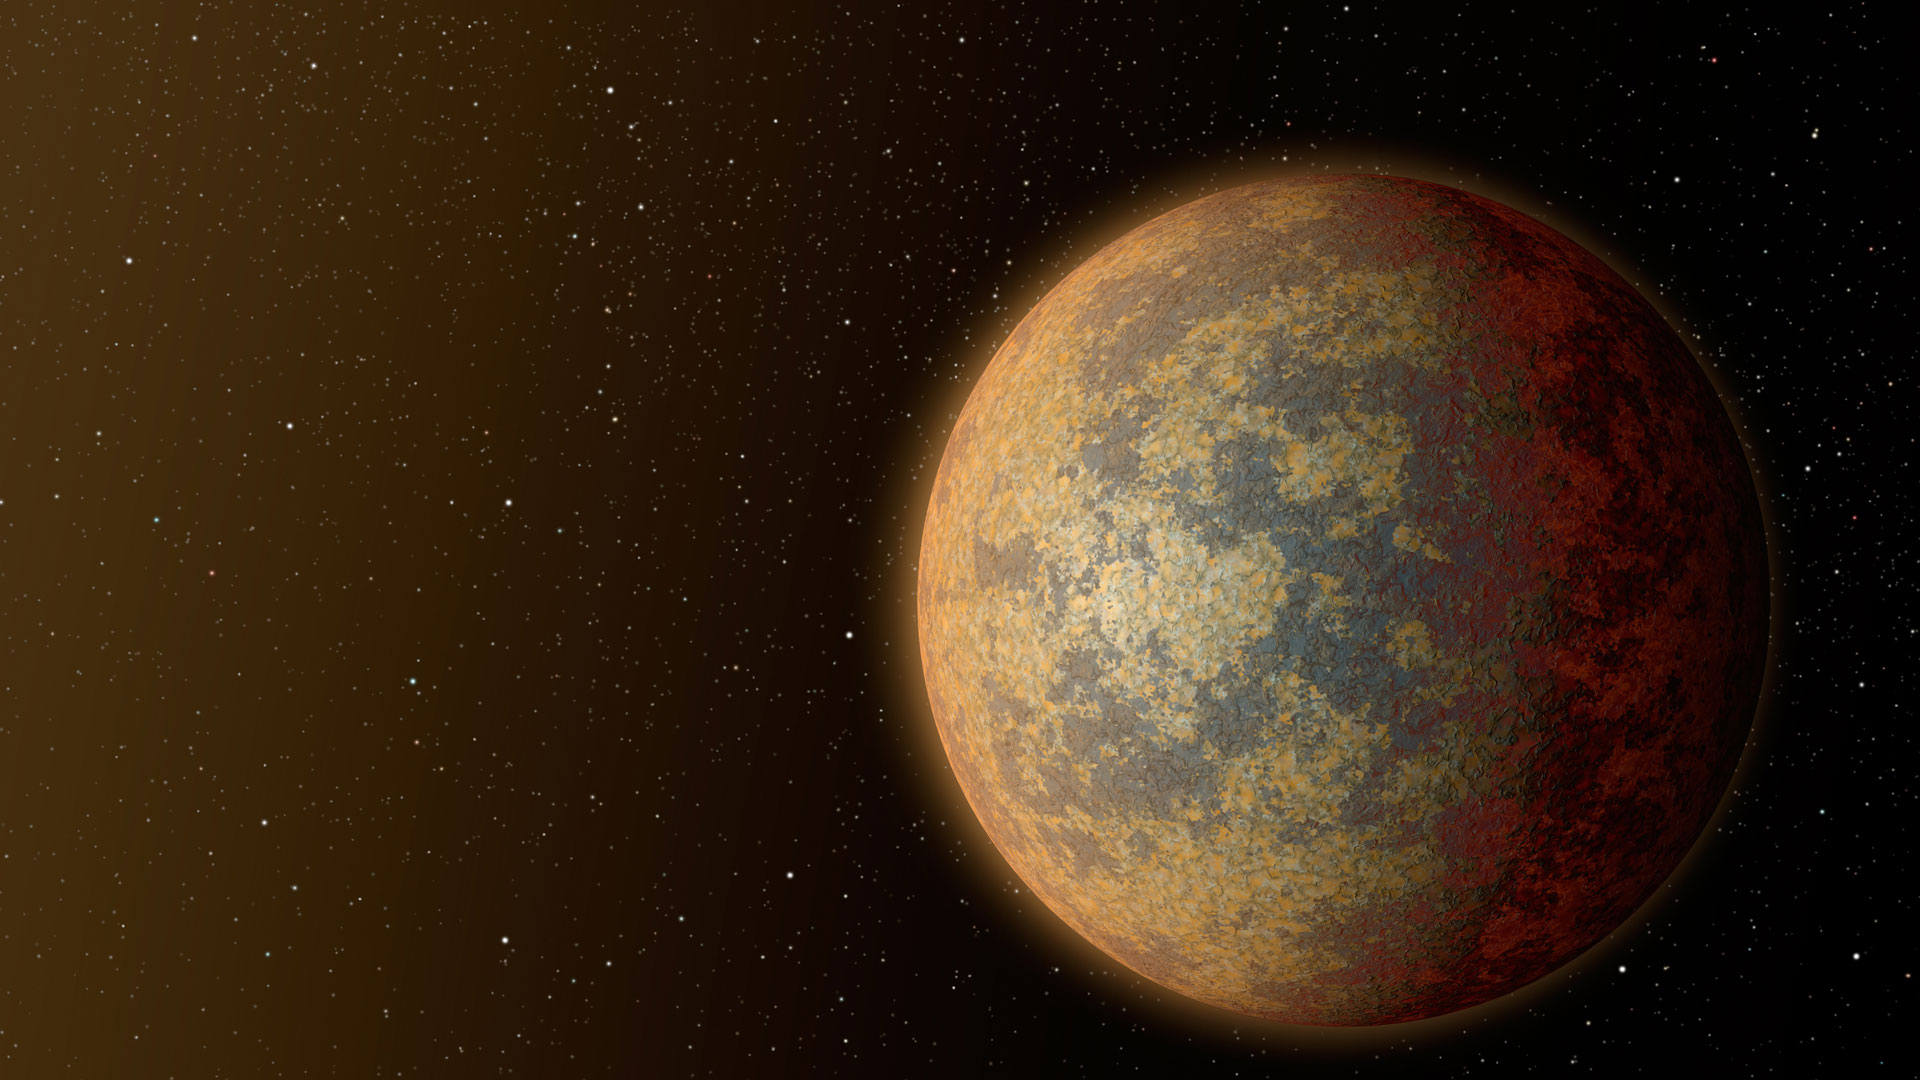 Spitzer Confirms Rocky Exoplanet HD 219134b, about 1.6 Times the Size of Earth